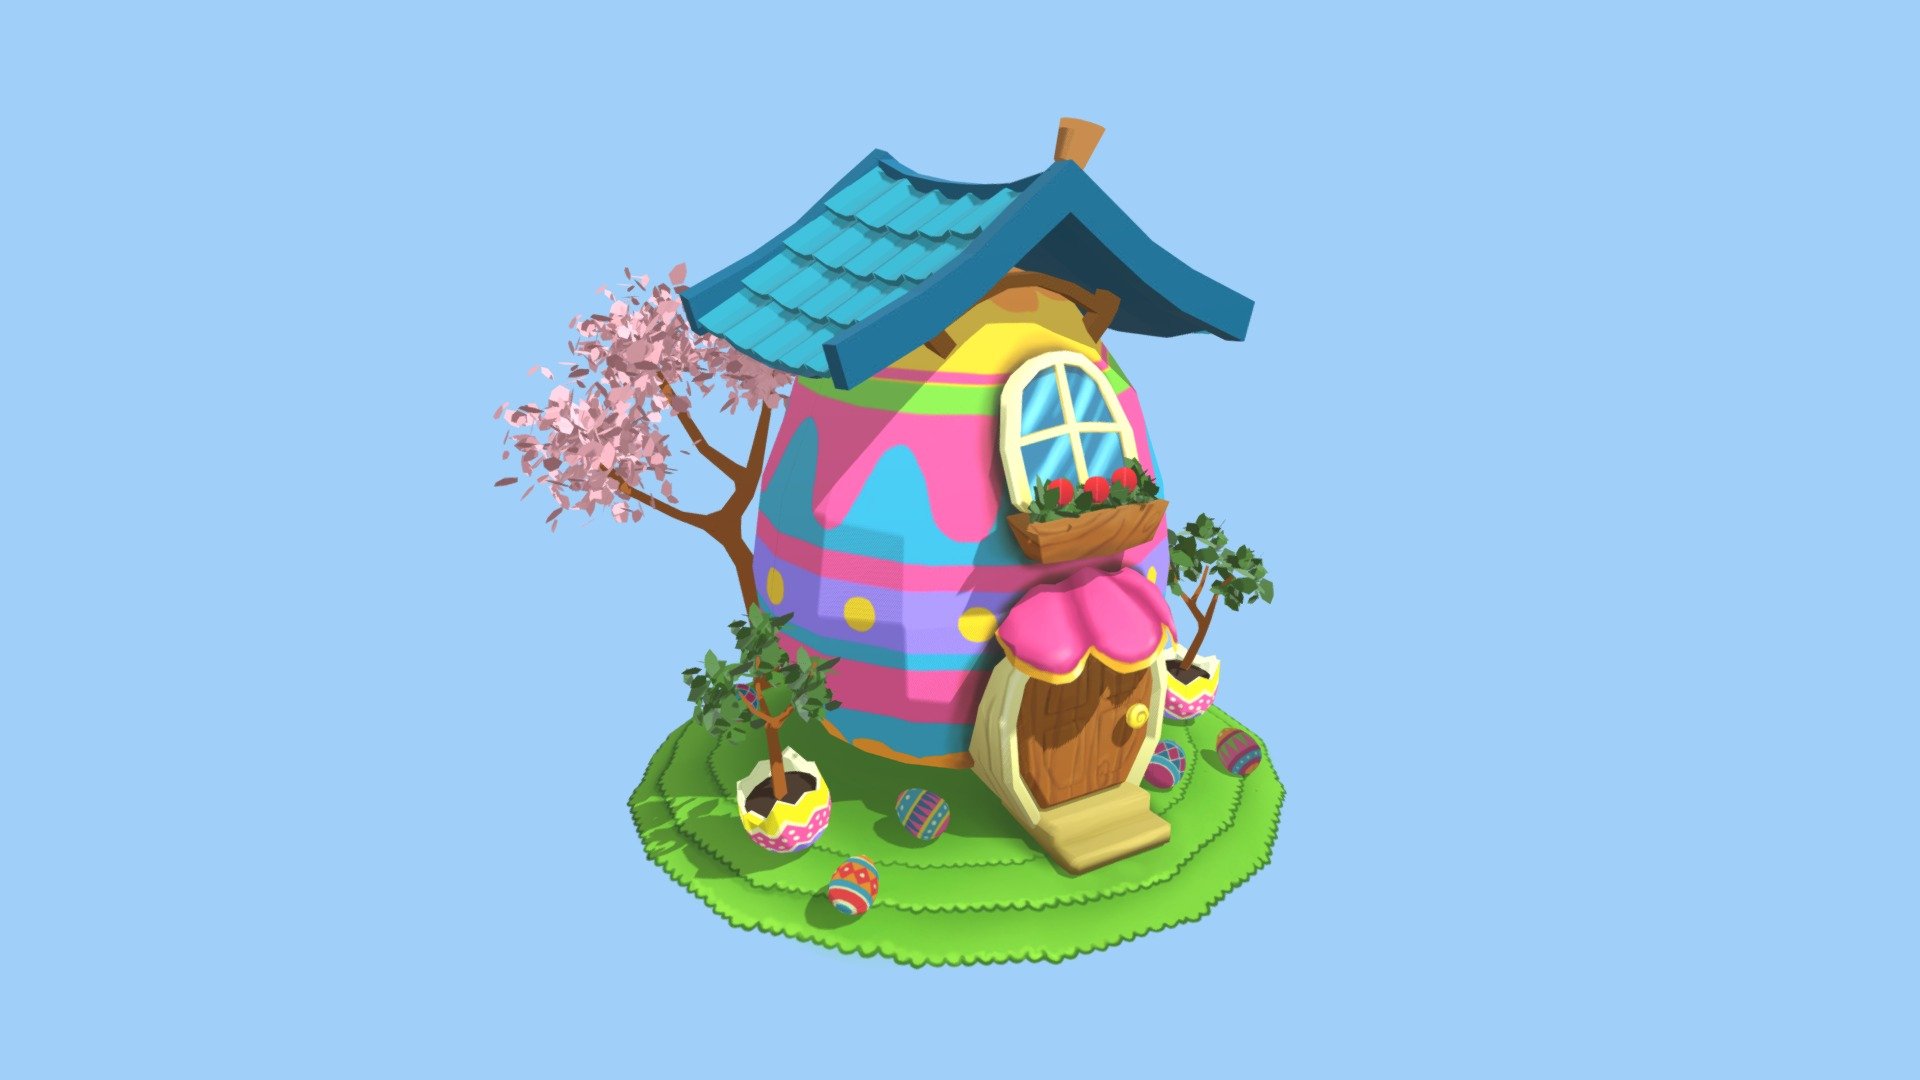 I decided to try my hand at a week-long challange from Sketchfab. 

Meet the Easter bunny house. I think since the Easter bunny brings chocolate eggs, his house should also be directly related to this theme.

This is my second project in the Blender. The hardest thing was to meet the deadline :D
Thanks to this project, I learned how to use transparent textures, as well as a little work with hand-paint textures and particles to create leaves.

Happy Easter to all of you!

The work is based on the illustration: https://www.123rf.com/photo_9331835_illustration-of-an-easter-egg-themed-house.html - ♡ The Easter Bunny House ♡ - 3D model by potato (@its_potato_chan) 3d model